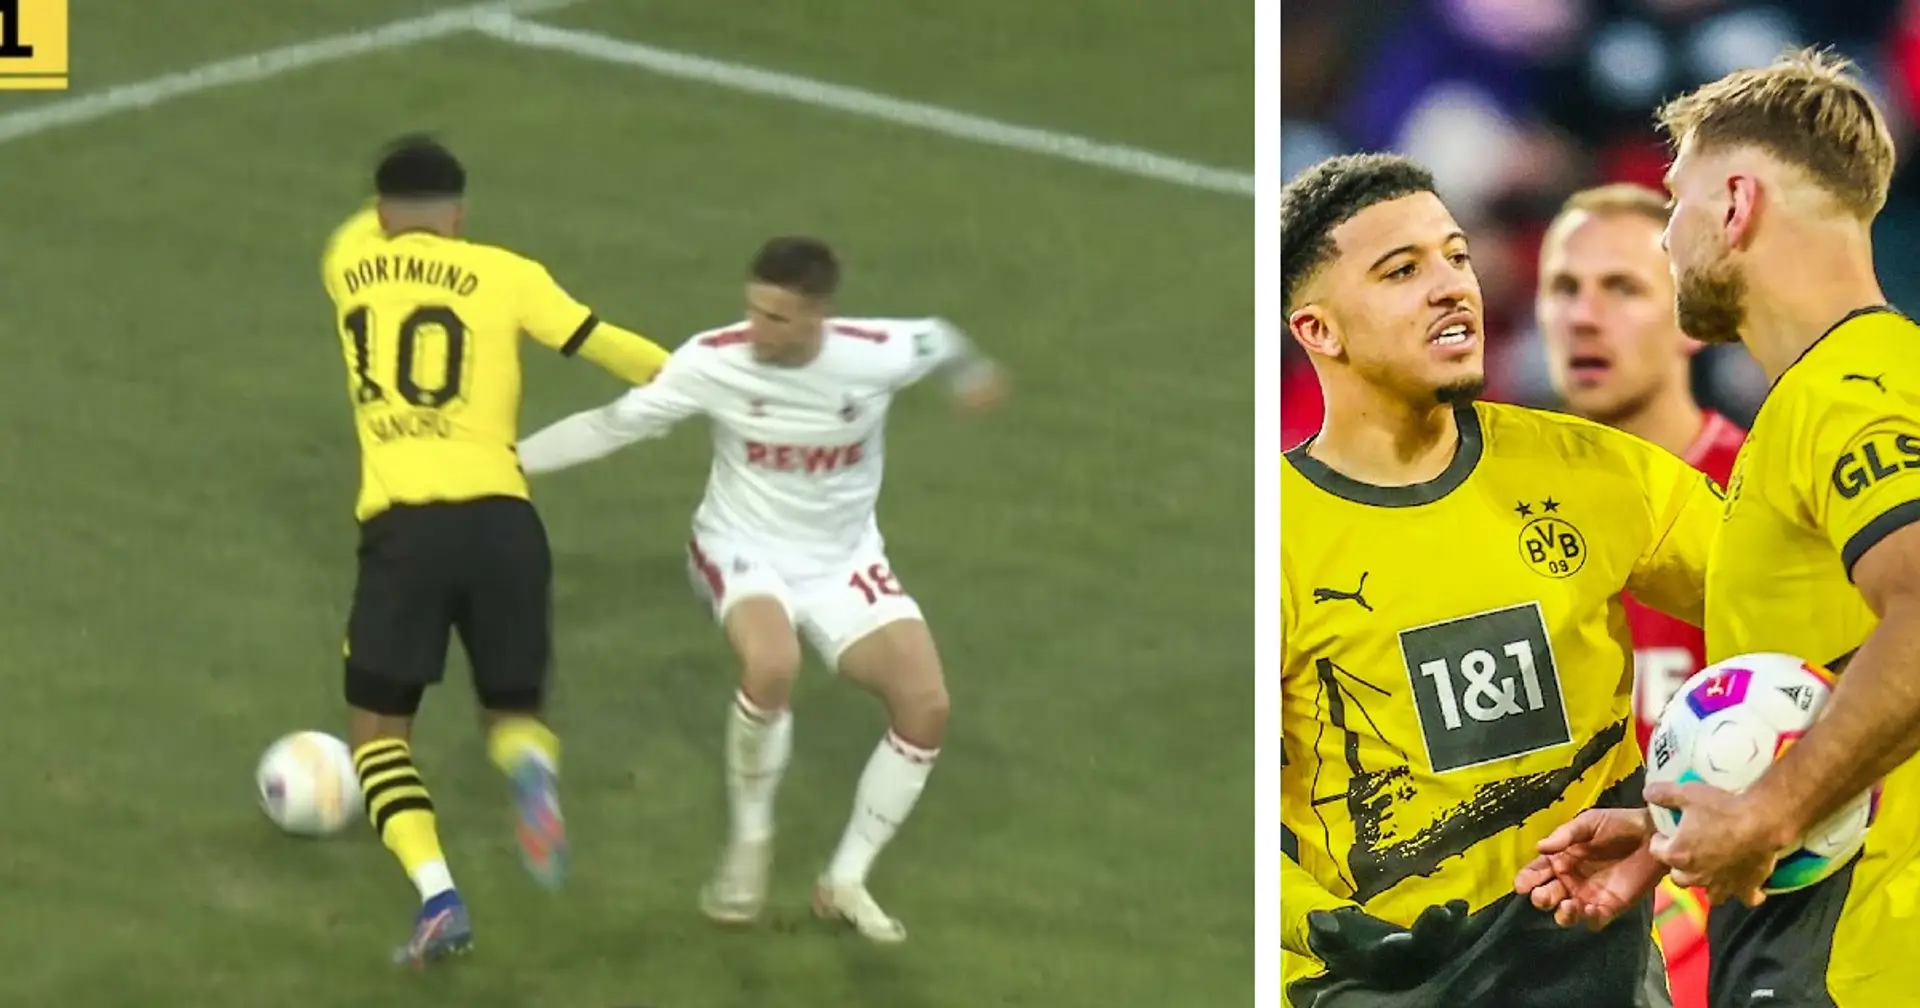 Jadon Sancho wins penalty for Dortmund - controversial incident followed